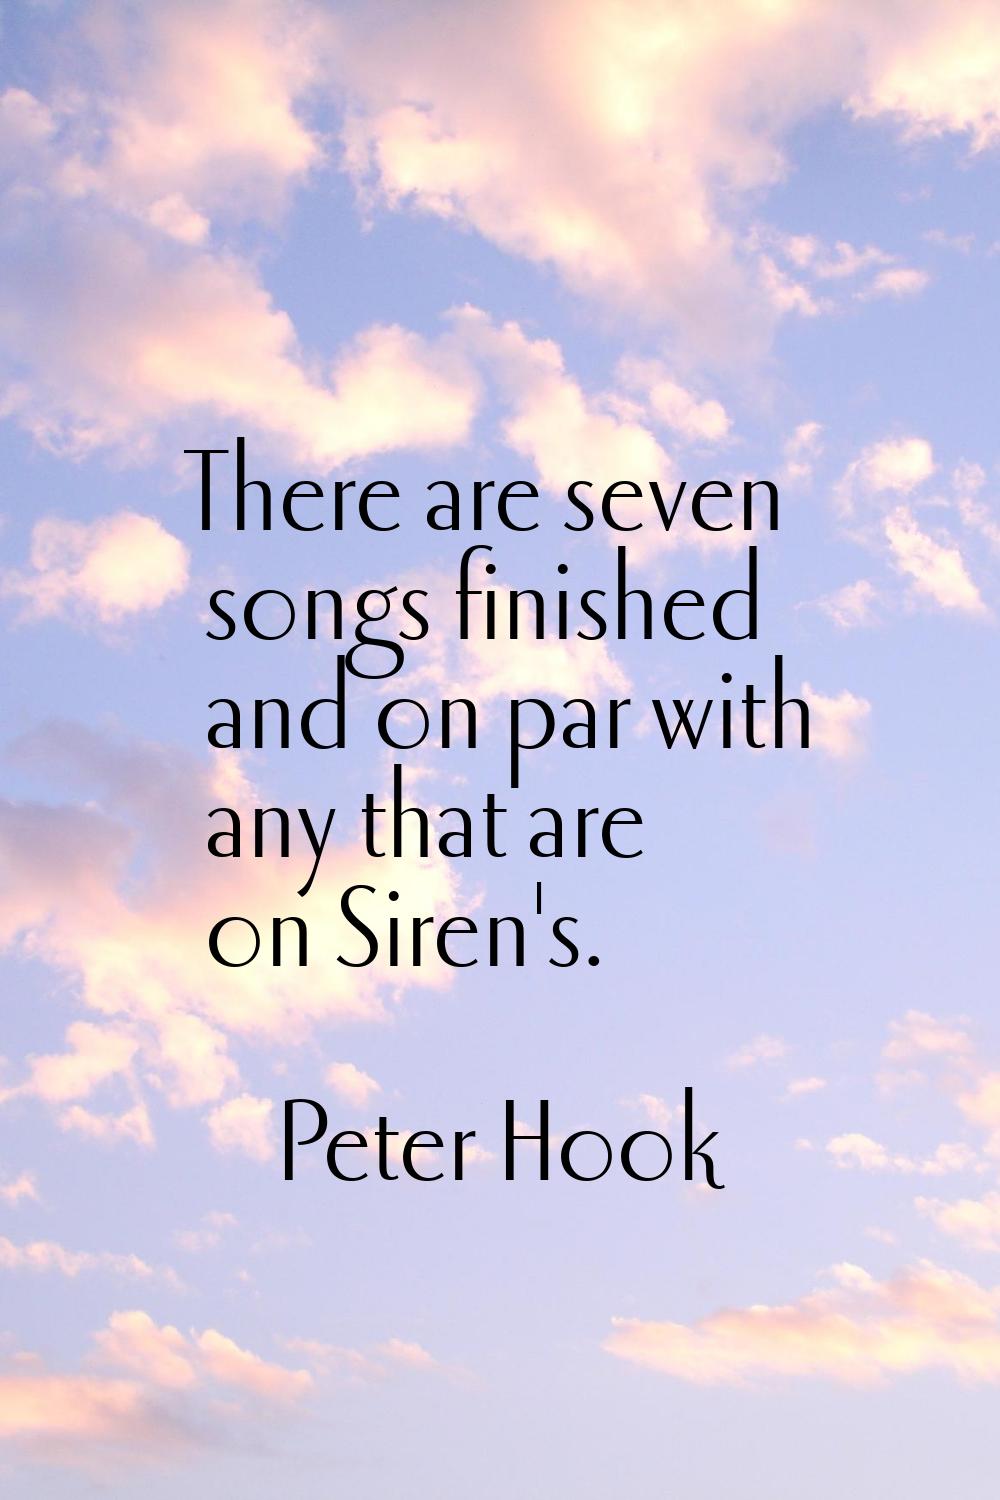 There are seven songs finished and on par with any that are on Siren's.